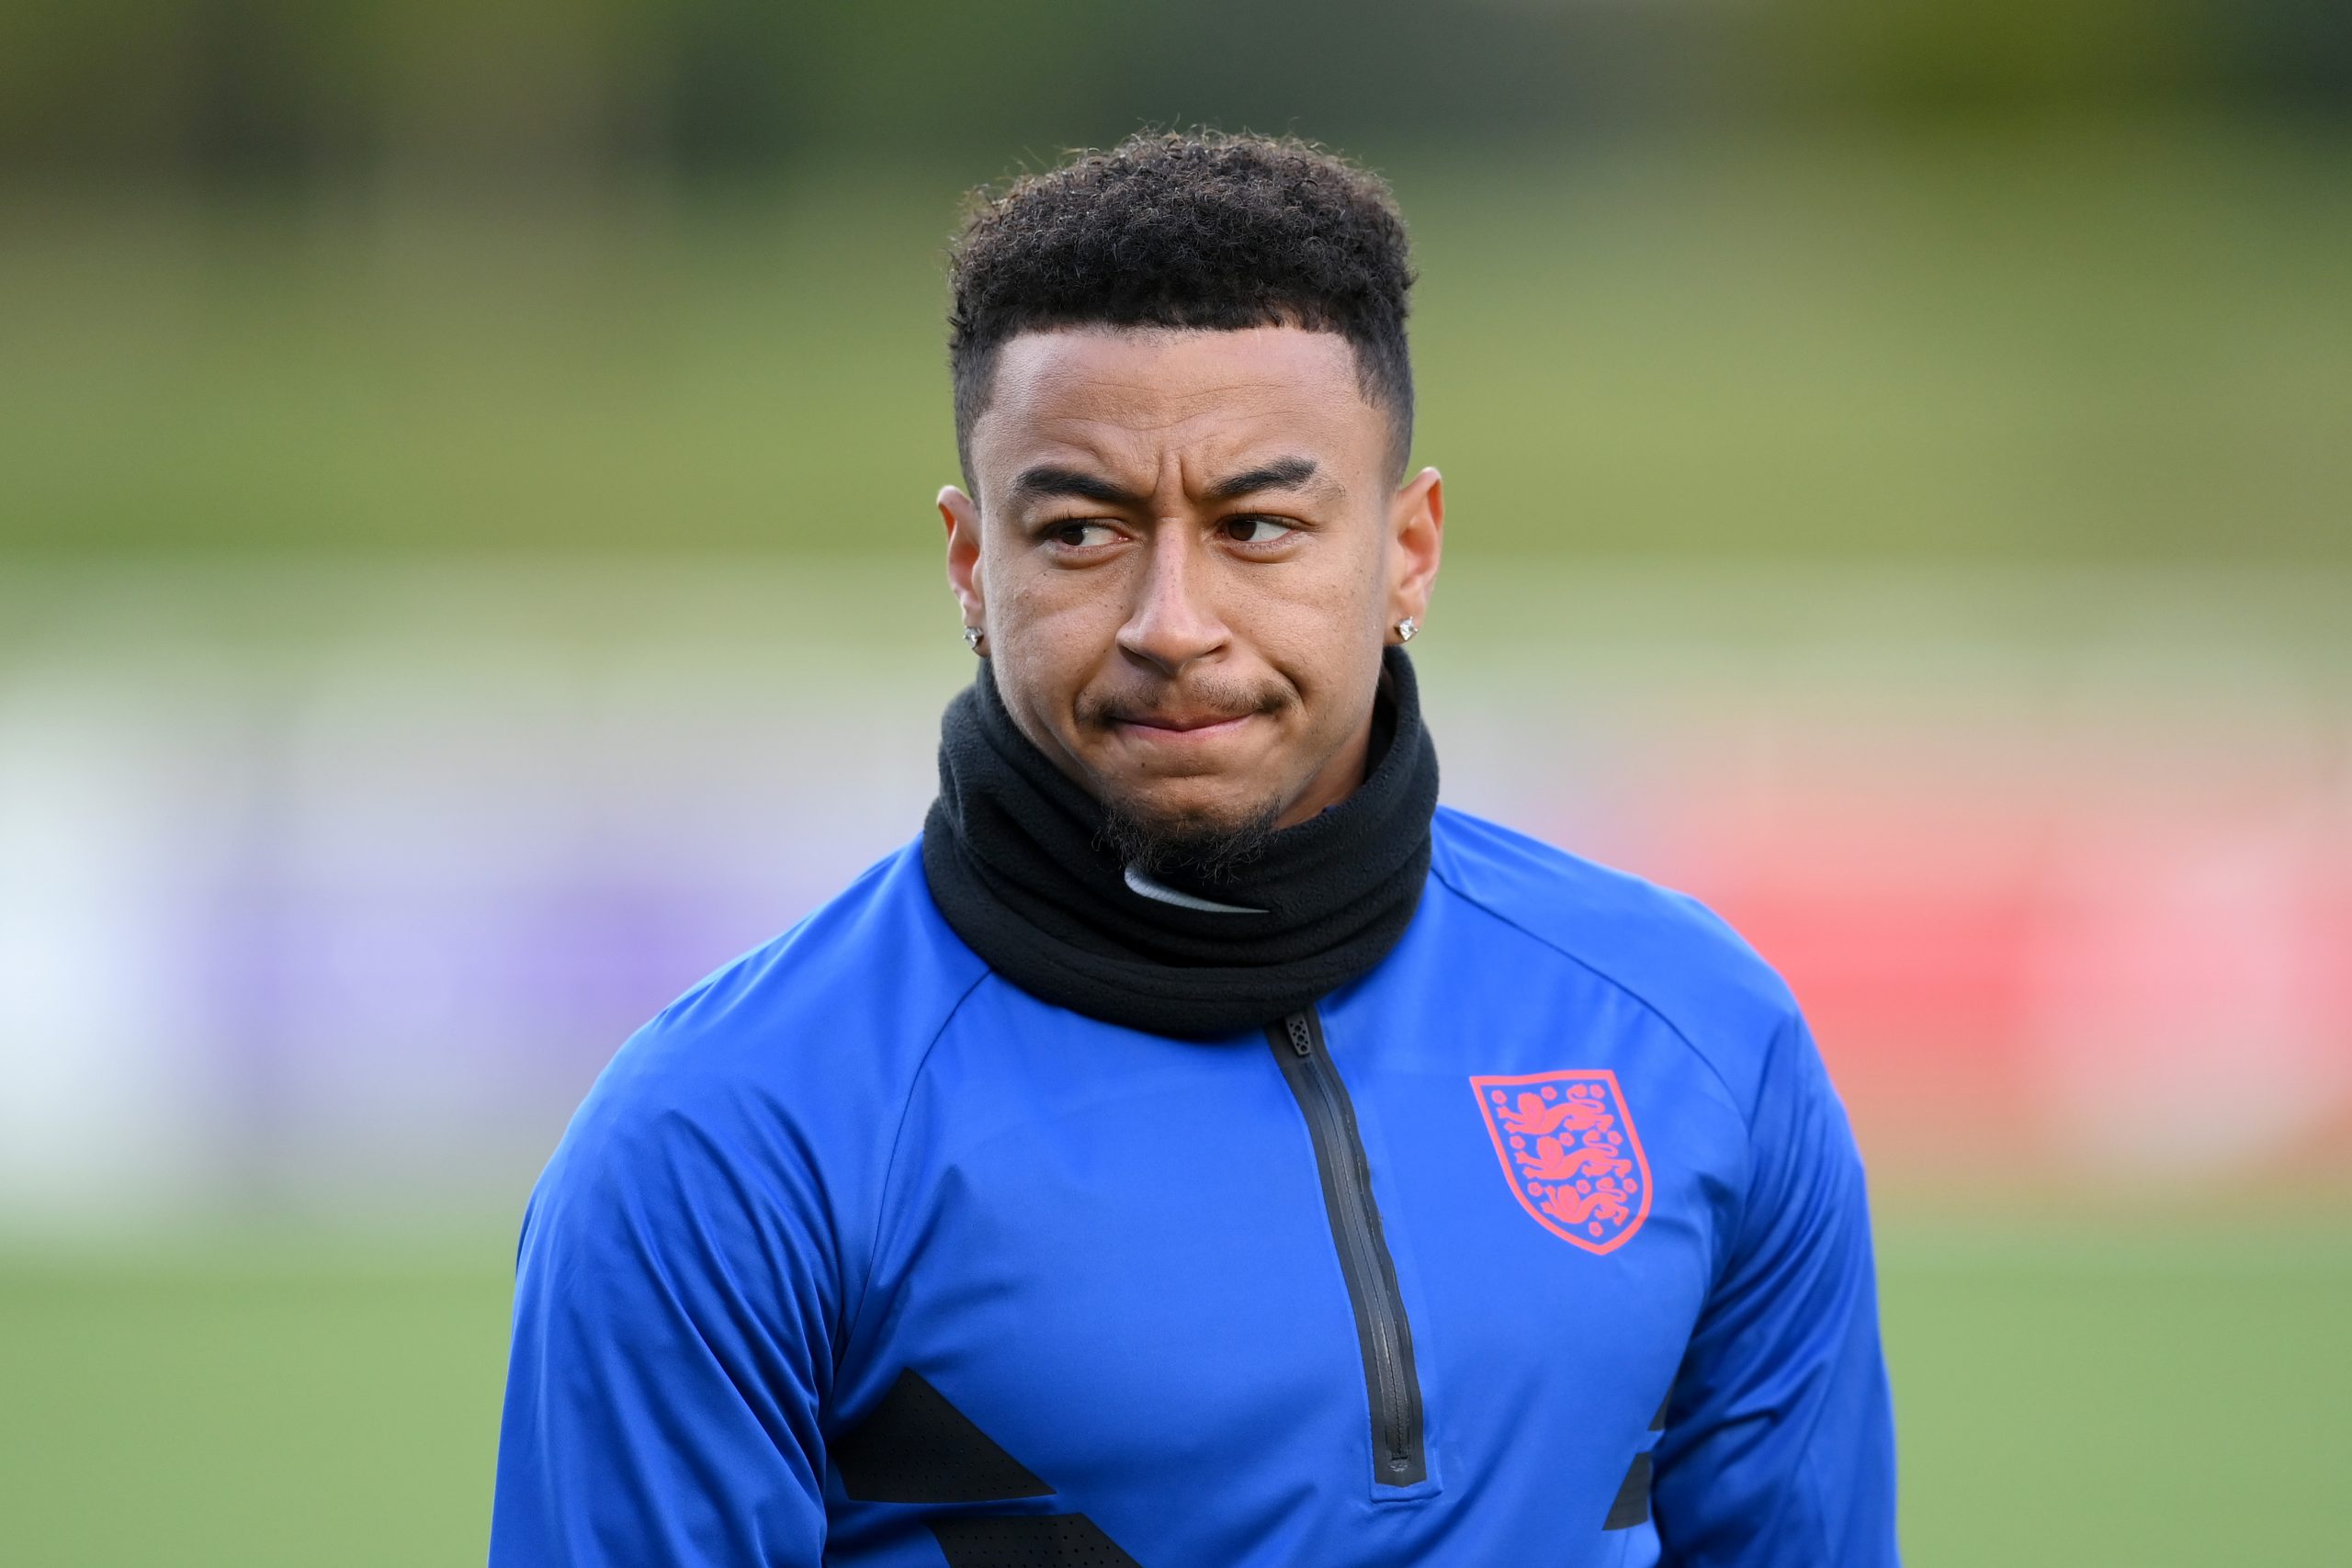 Jesse Lingard set to leave Manchester United. (Photo by Michael Regan/Getty Images)